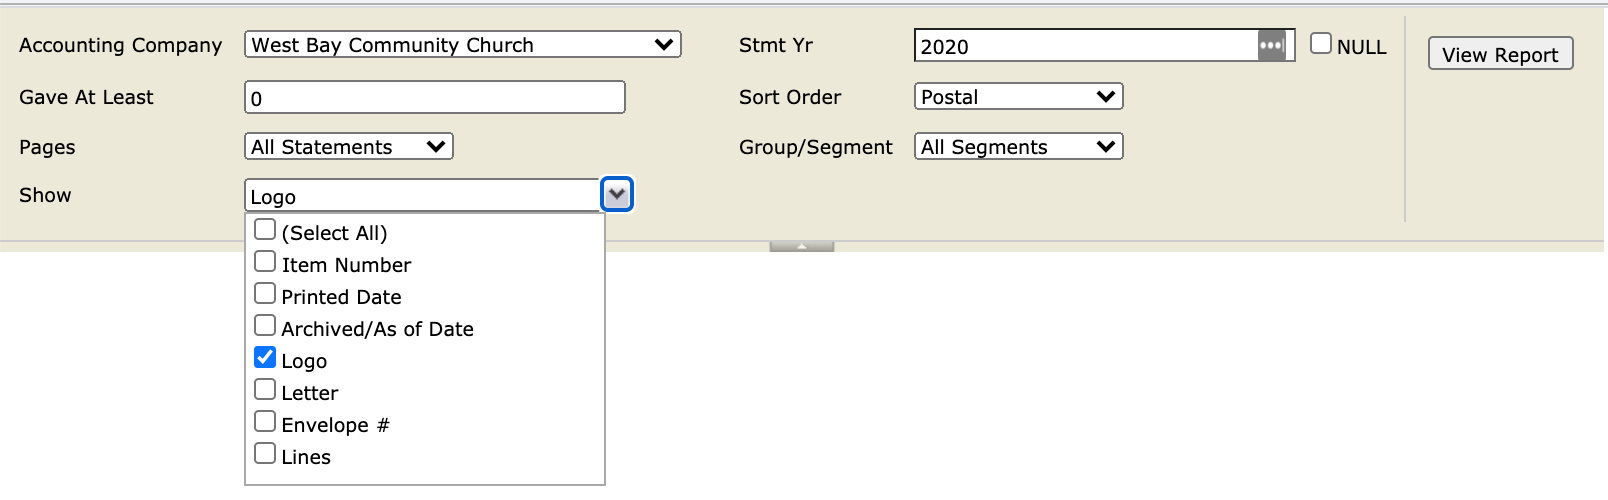 Example of the Standard Statement report with the Show drop-down list showing different options